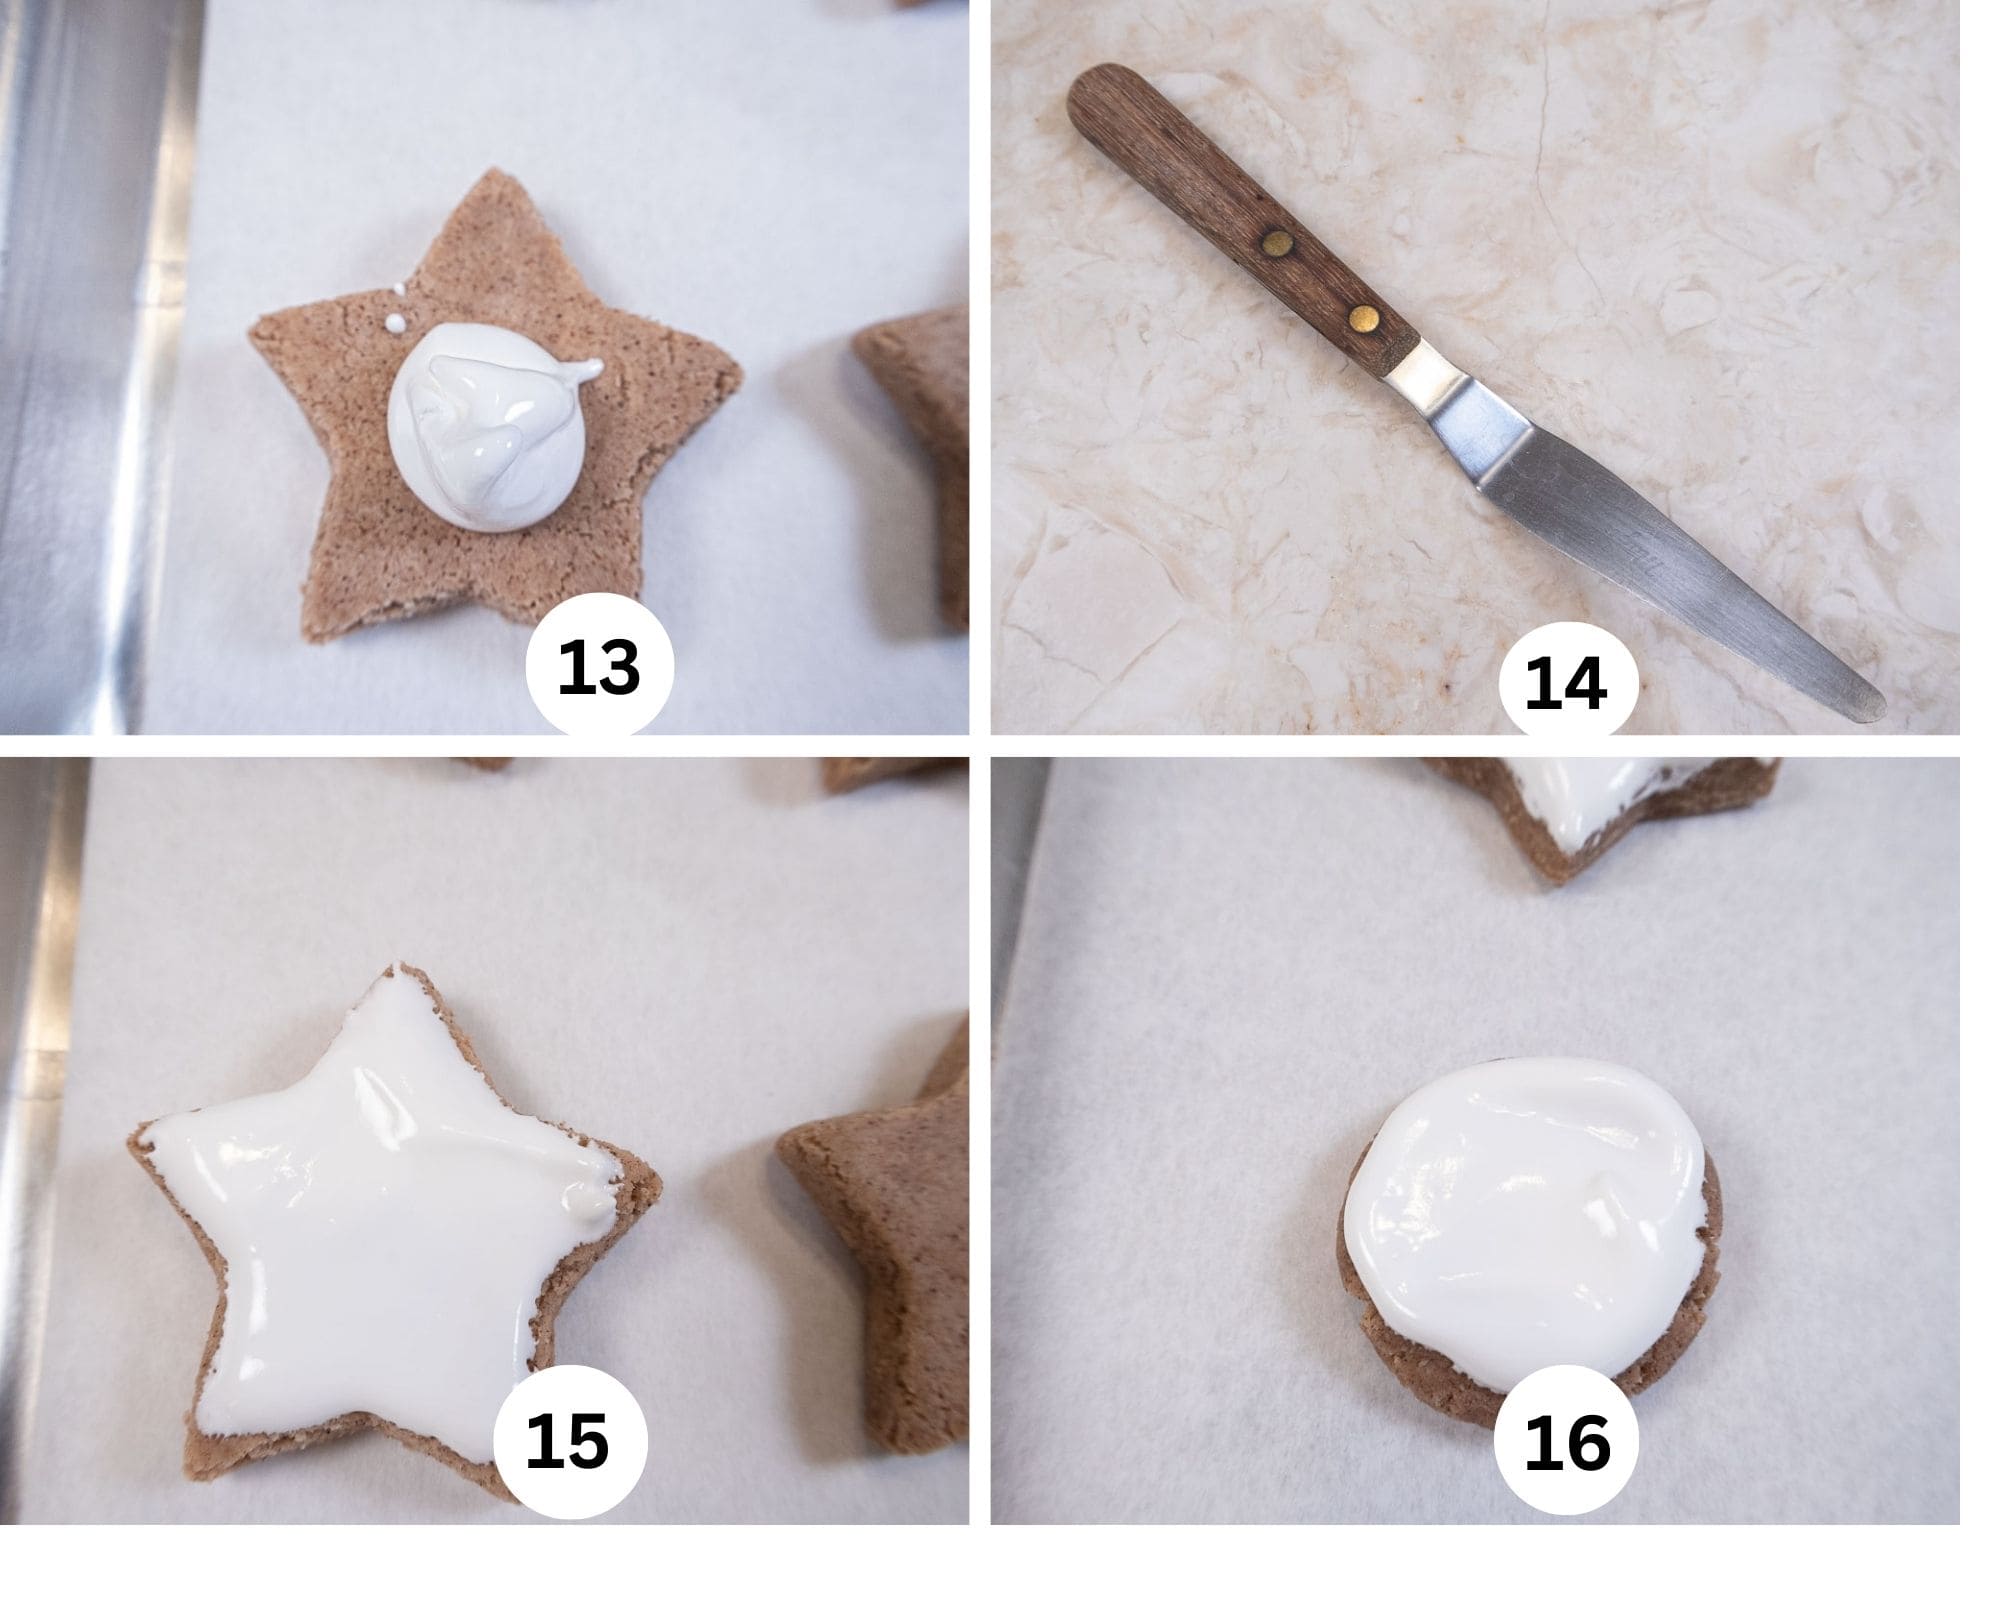 The last collage shows a dollop of meringue on a  cookie, a pointed offset spatula, the meringue covering the cookie and a round moon shaped cookie.